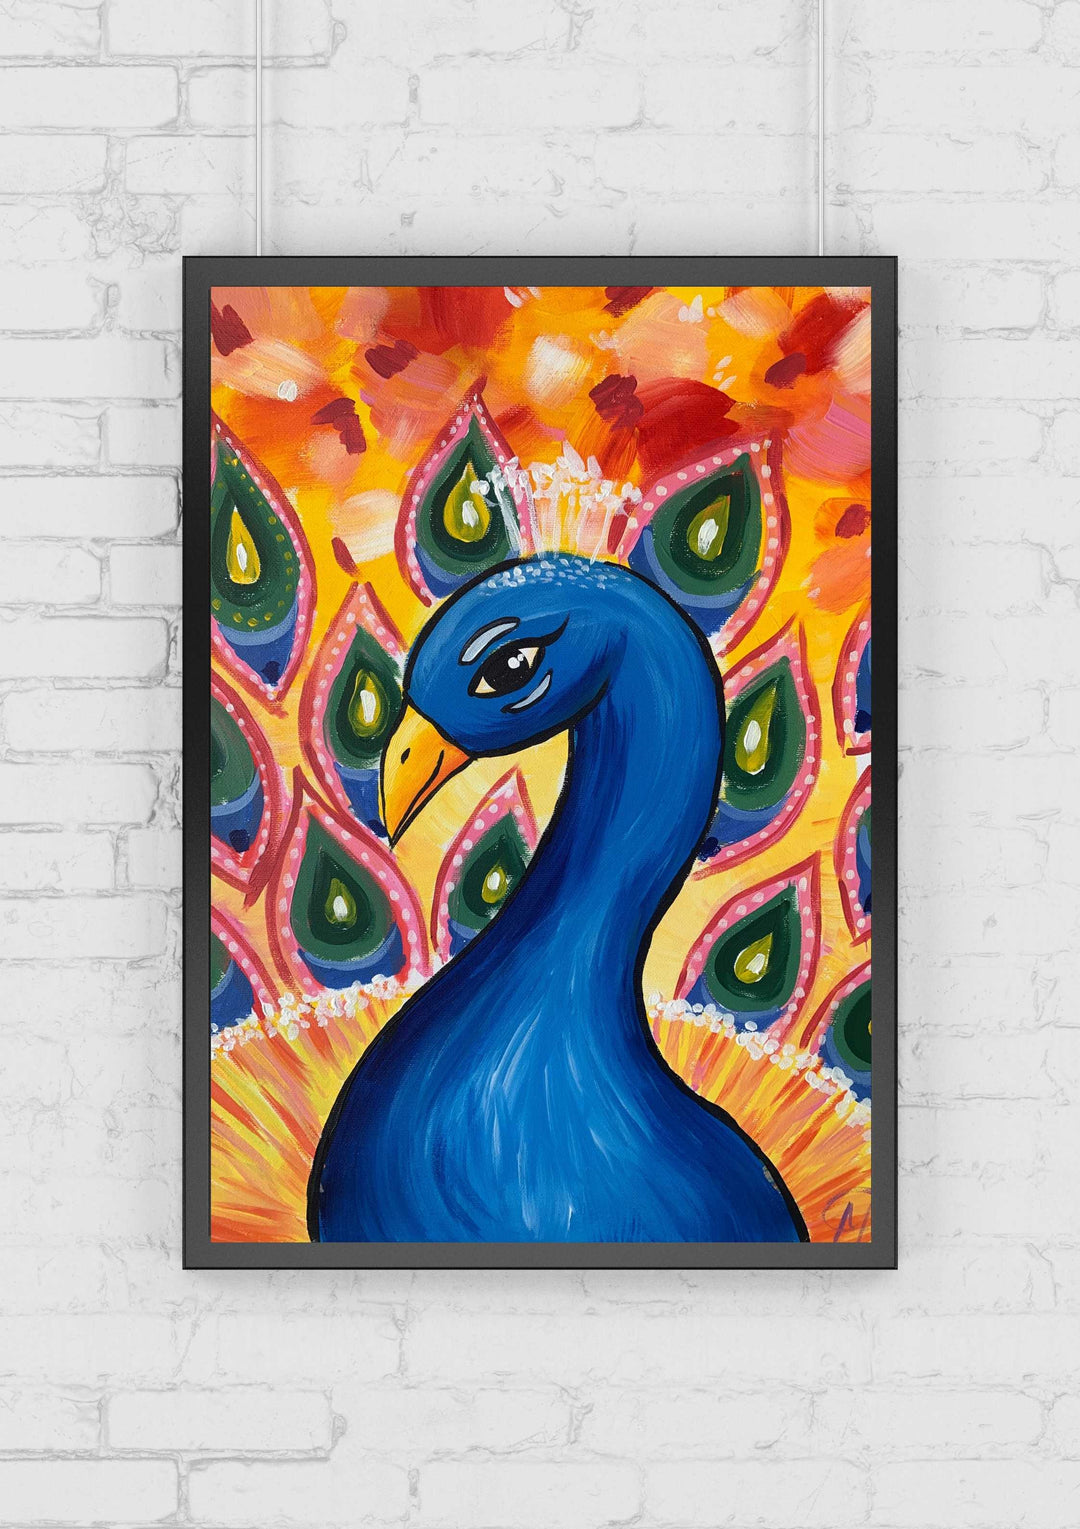 PEACOCK - PAINT AND SIP 9TH MARCH - MILTON BRISBANE 5PM-Ticket-Paint Juicy - Paint and Sip-Paint Juicy - Paint and Sip